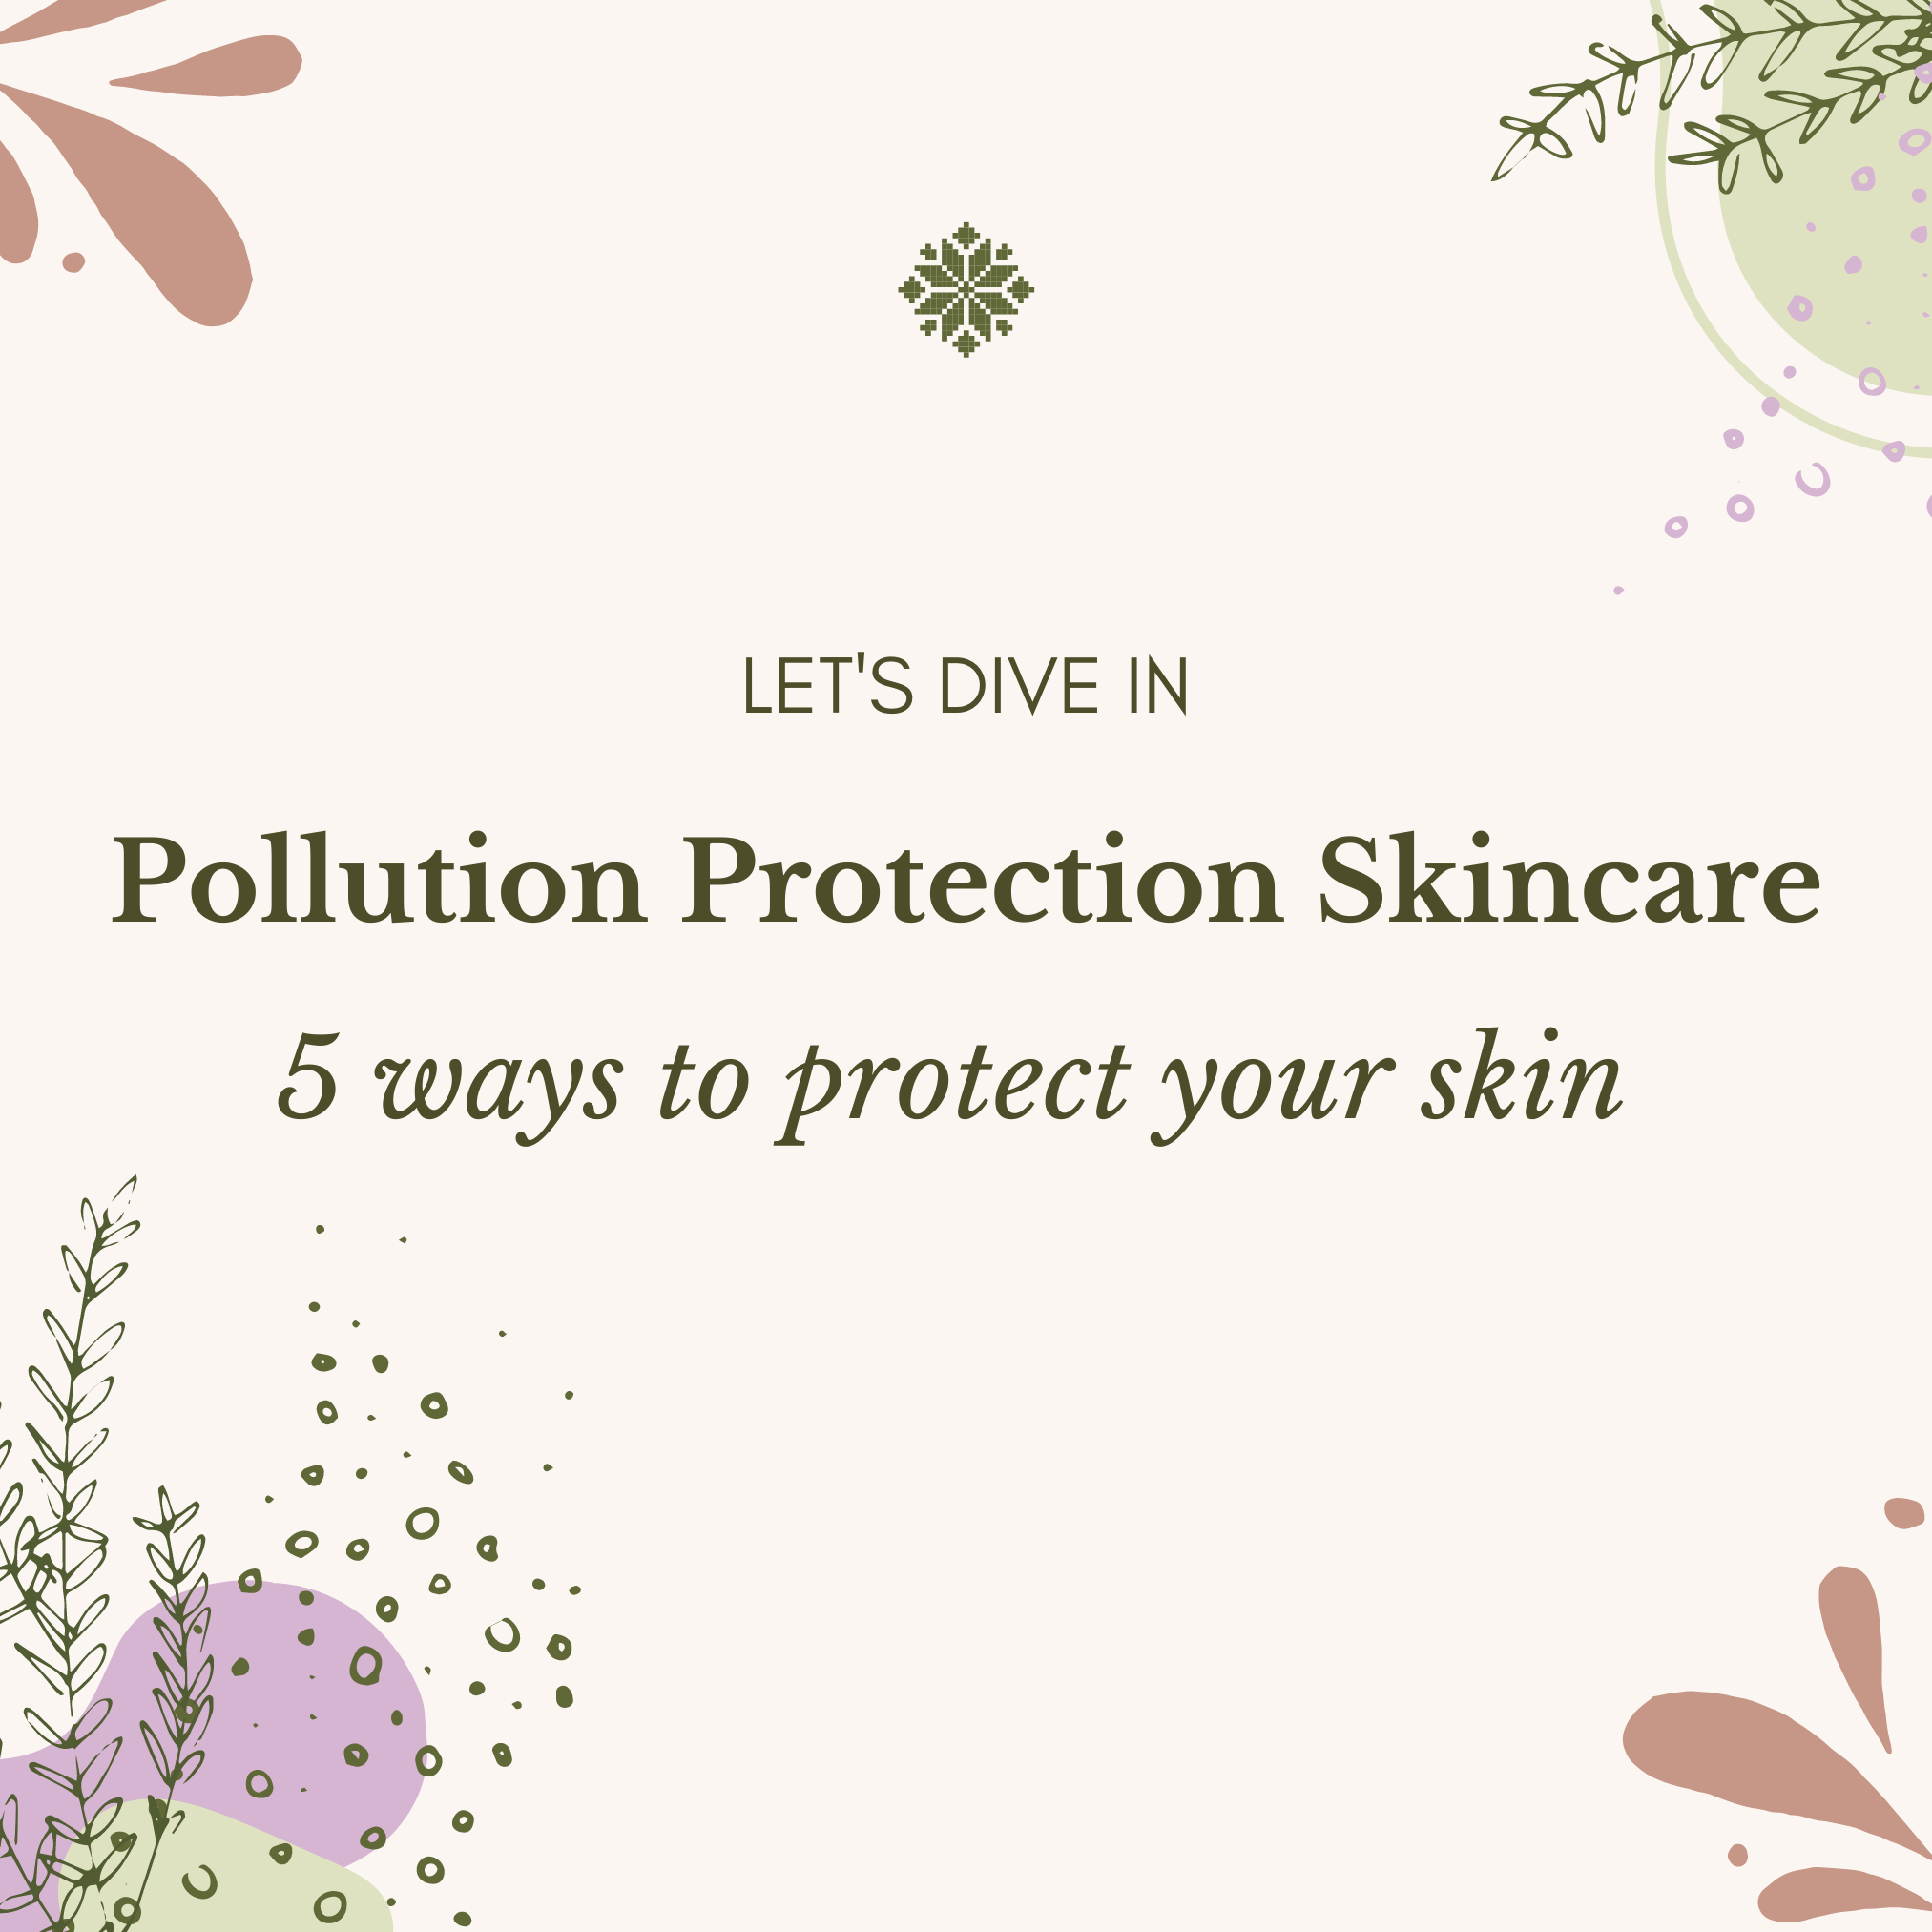 Pollution Protection Skincare: 5 Ways To Protect Your Skin This Summer